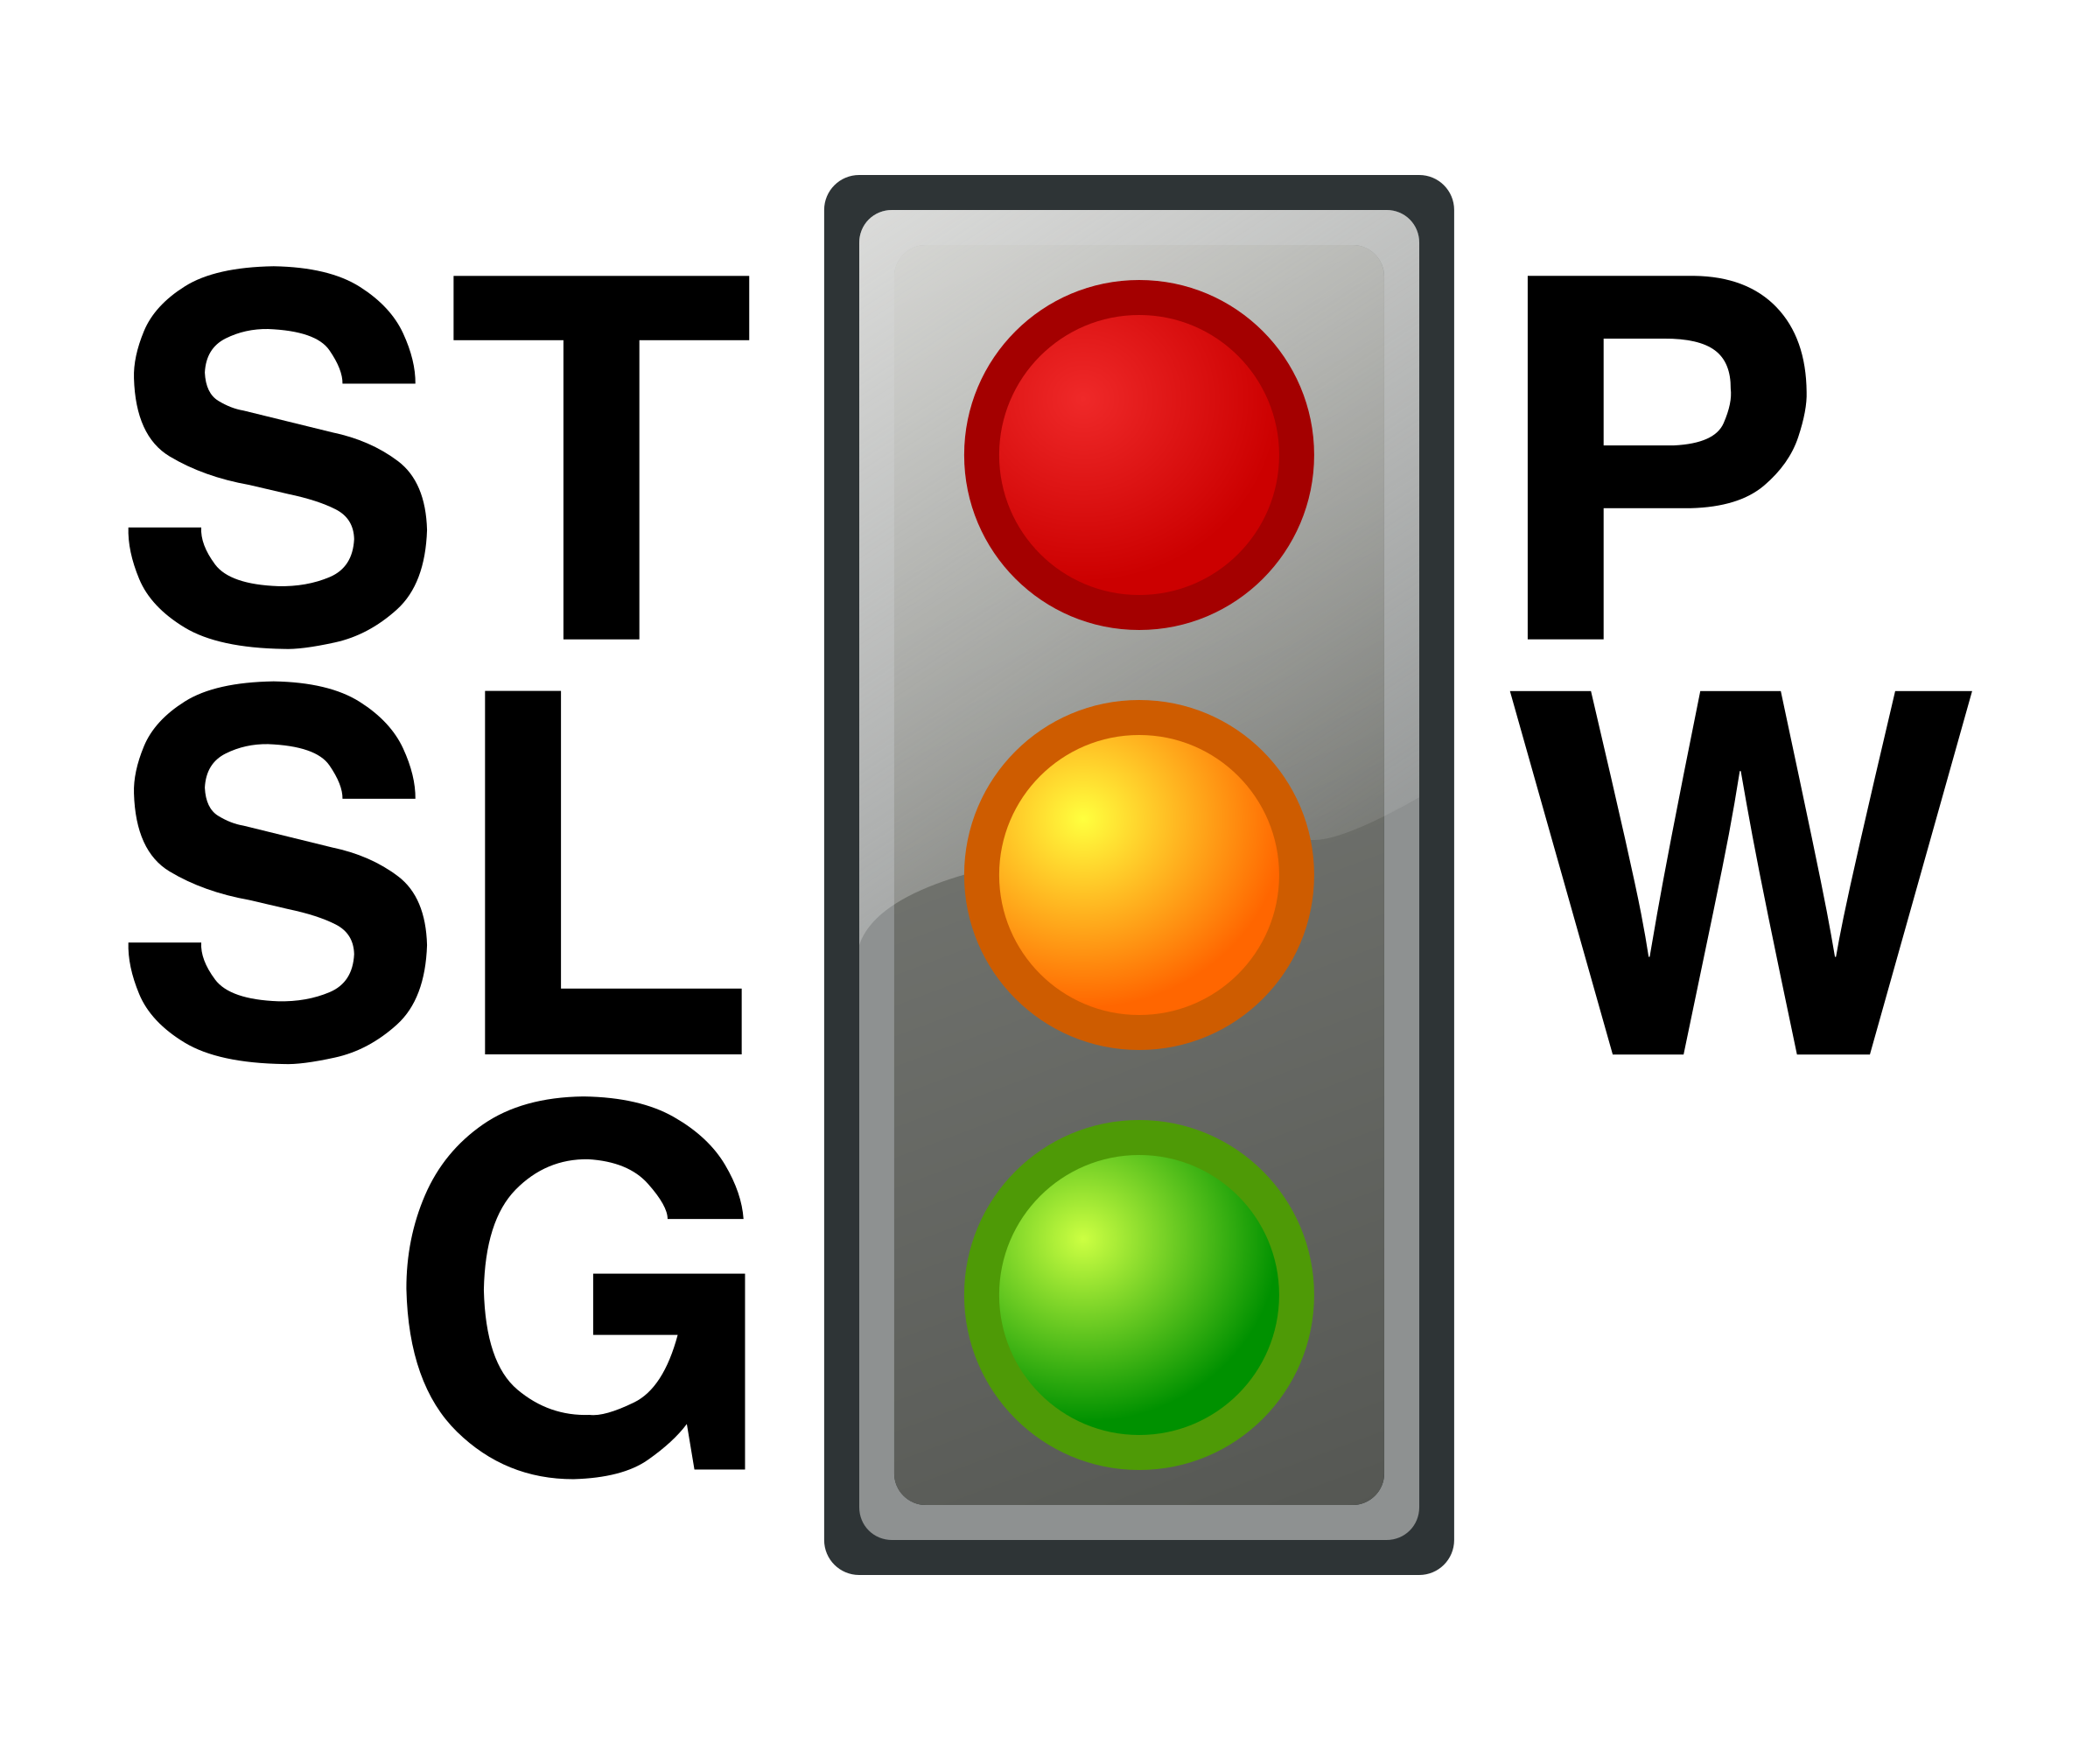 stop-light-clipart-meaning-of-the-traffic-lights-image-27102